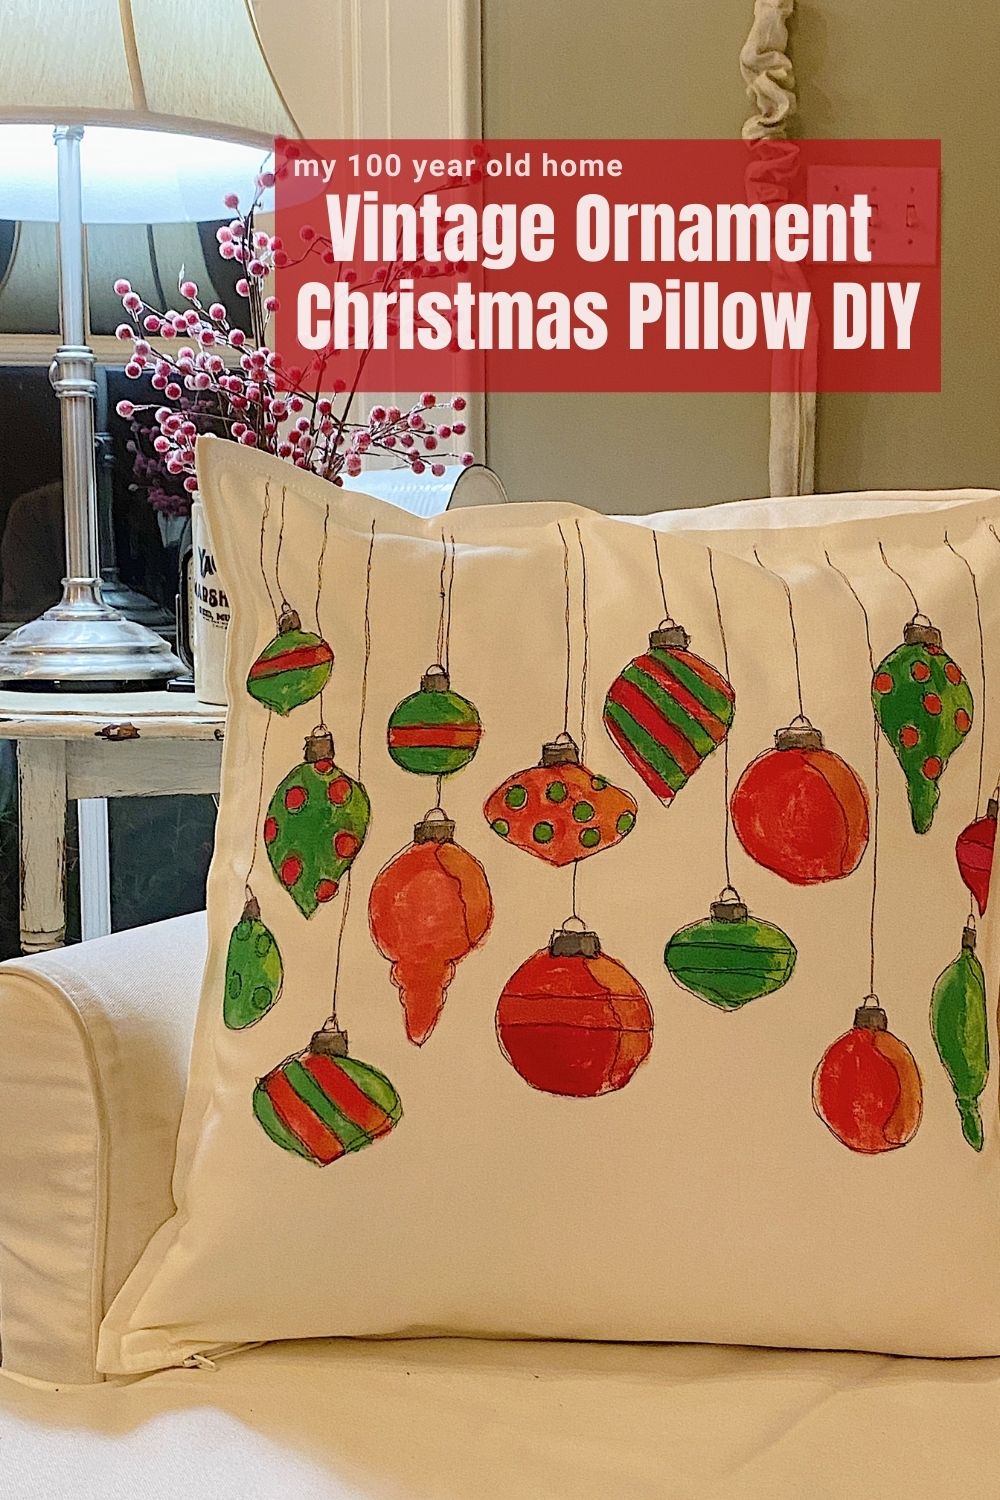 Every Christmas I make a few homemade pillows. I just finished this vintage ornament Christmas pillow and I absolutely love it.